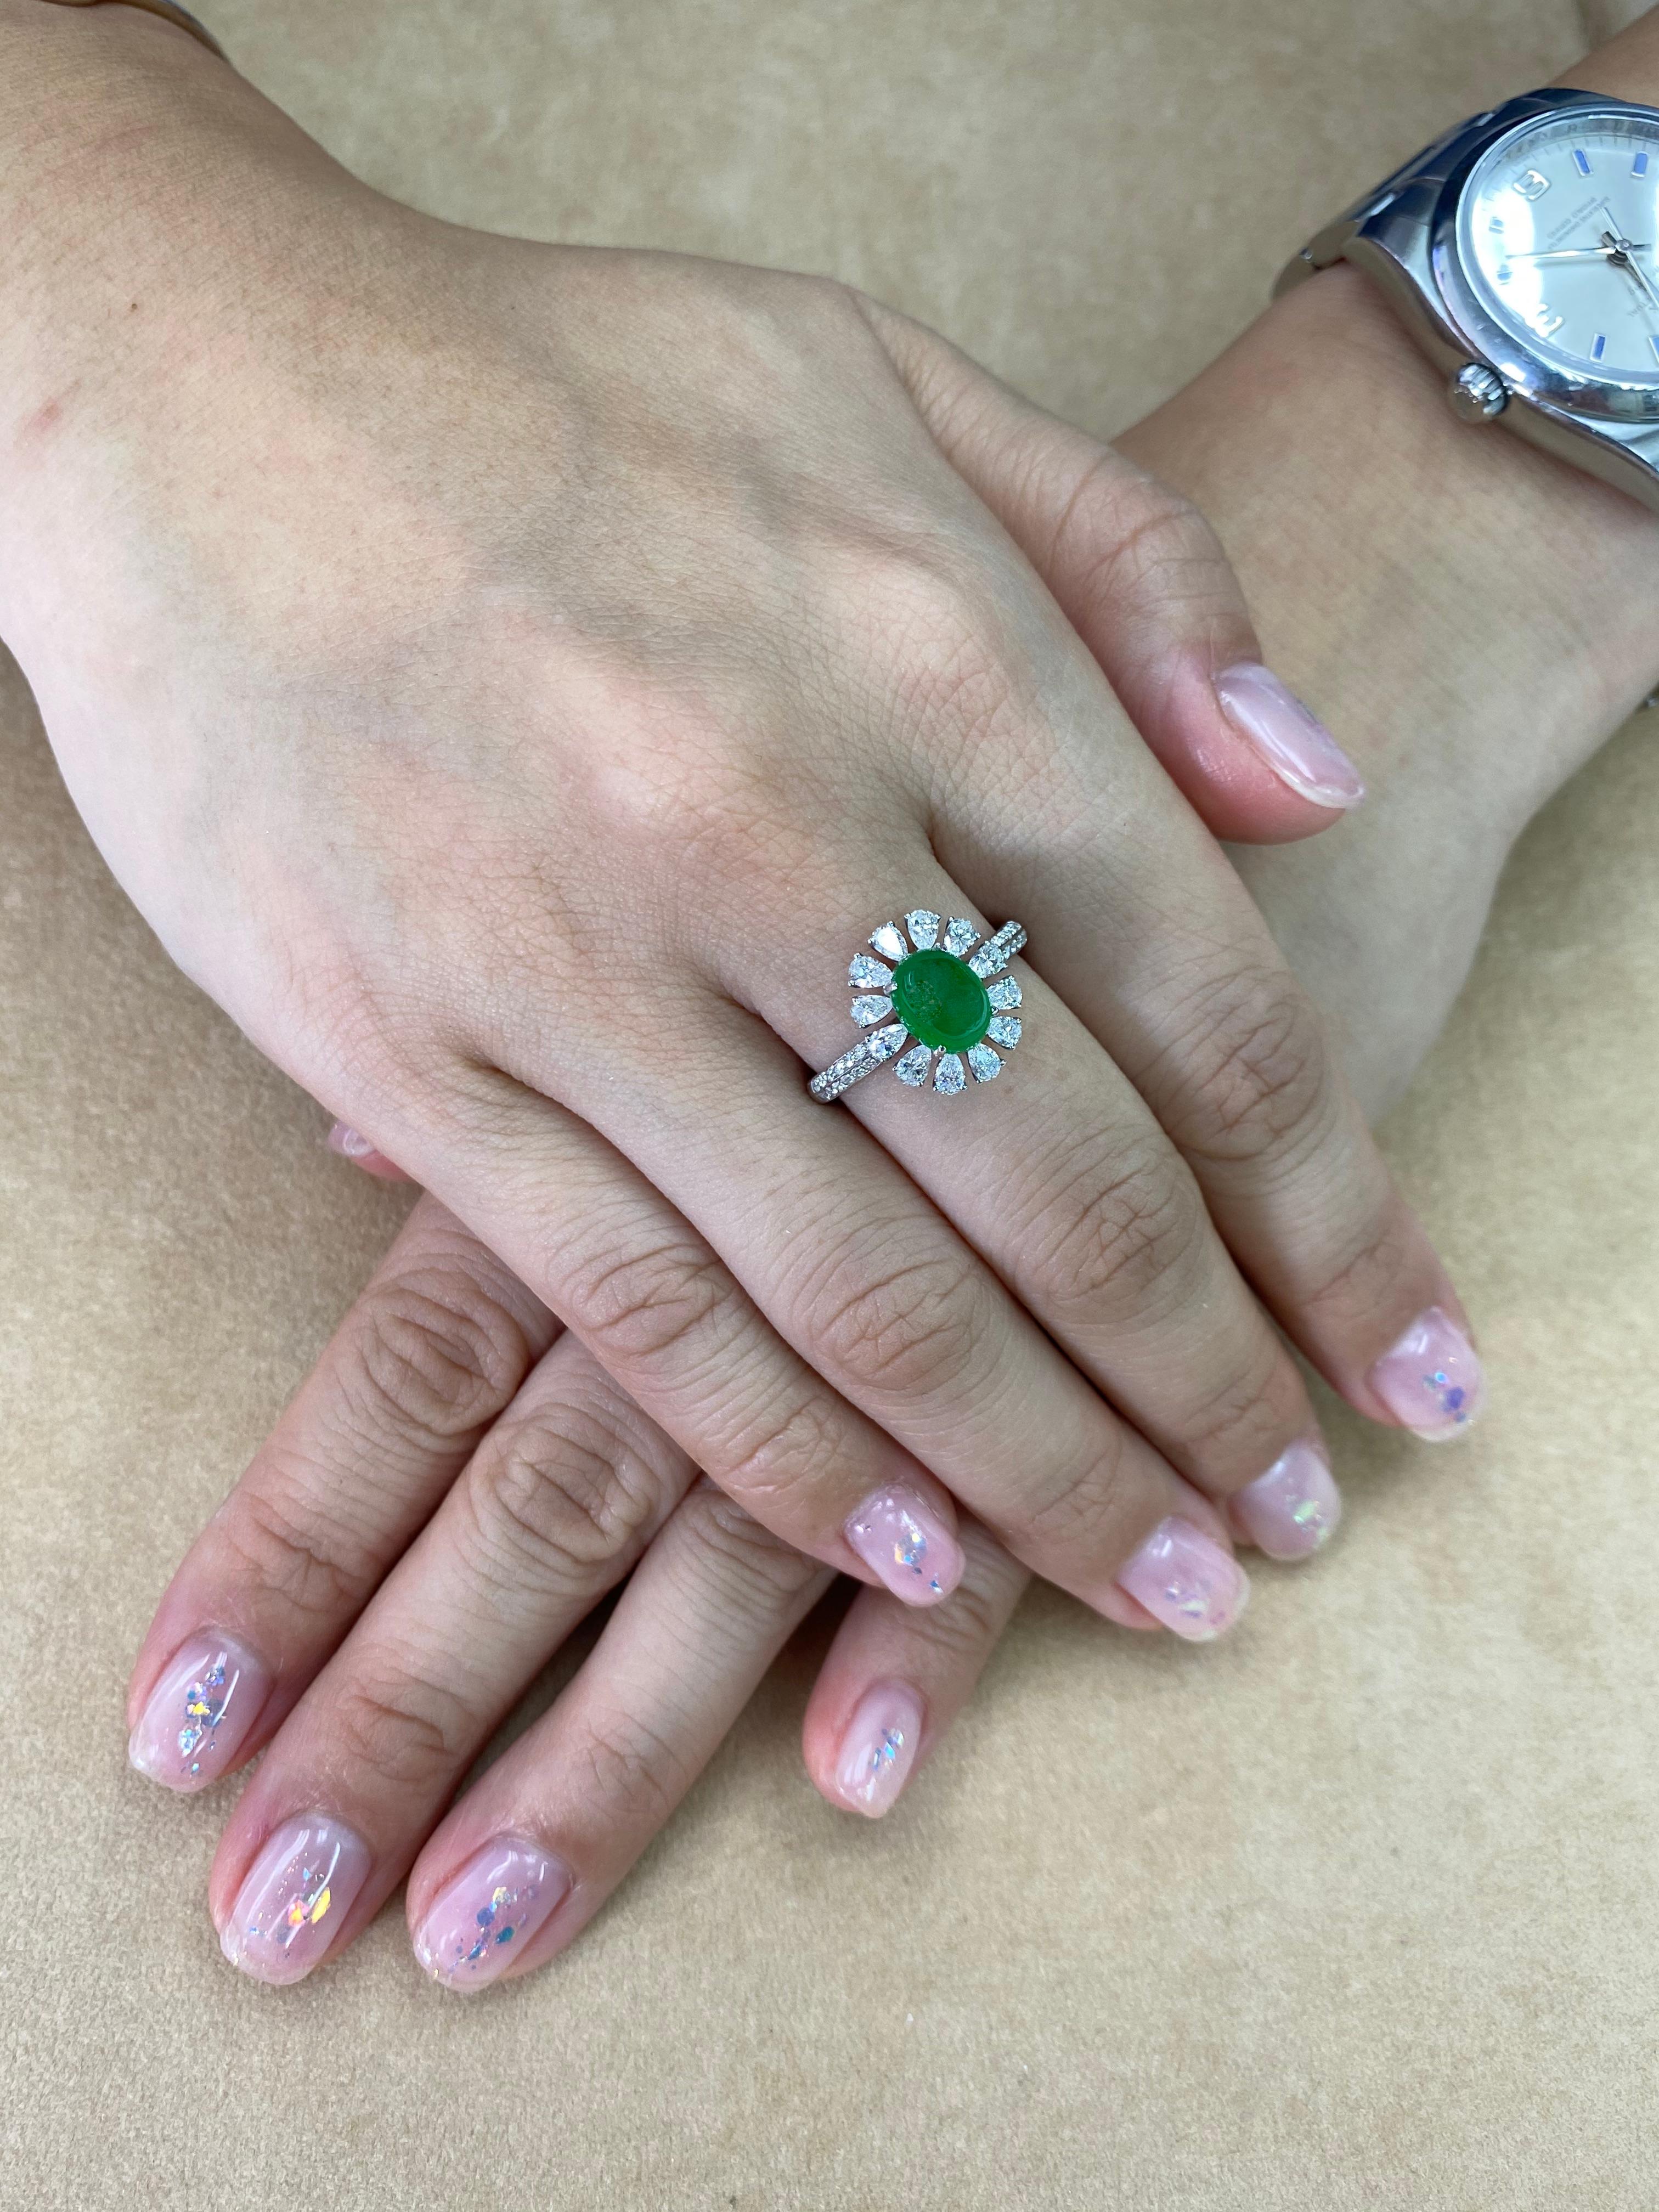 Please check out the HD video! THIS JADE GLOWS! Here is an apple green Jade and diamond ring. It is certified by 2 labs as natural jadeite jade with no treatment or enhancement. The ring is set in 18k white gold and diamonds. There are 12 pear